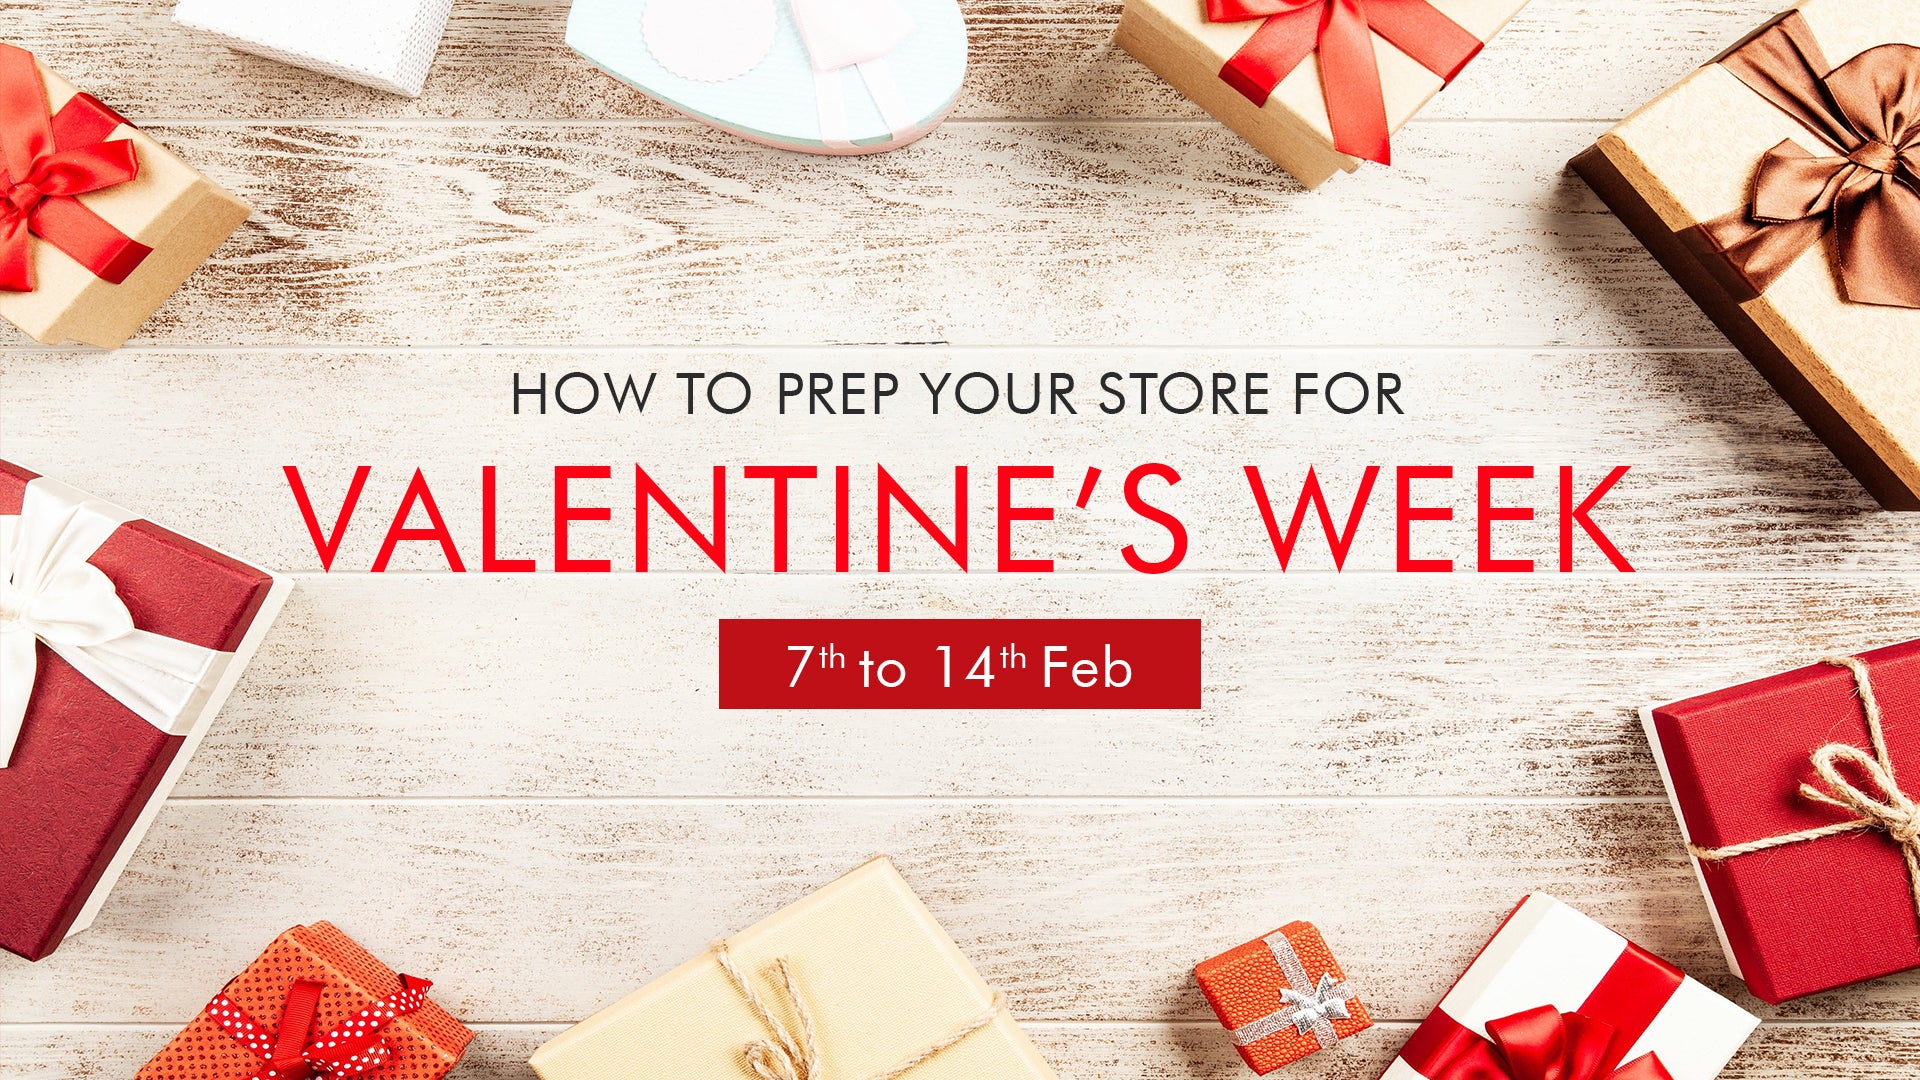 How to Prep your Store for Valentine's Week